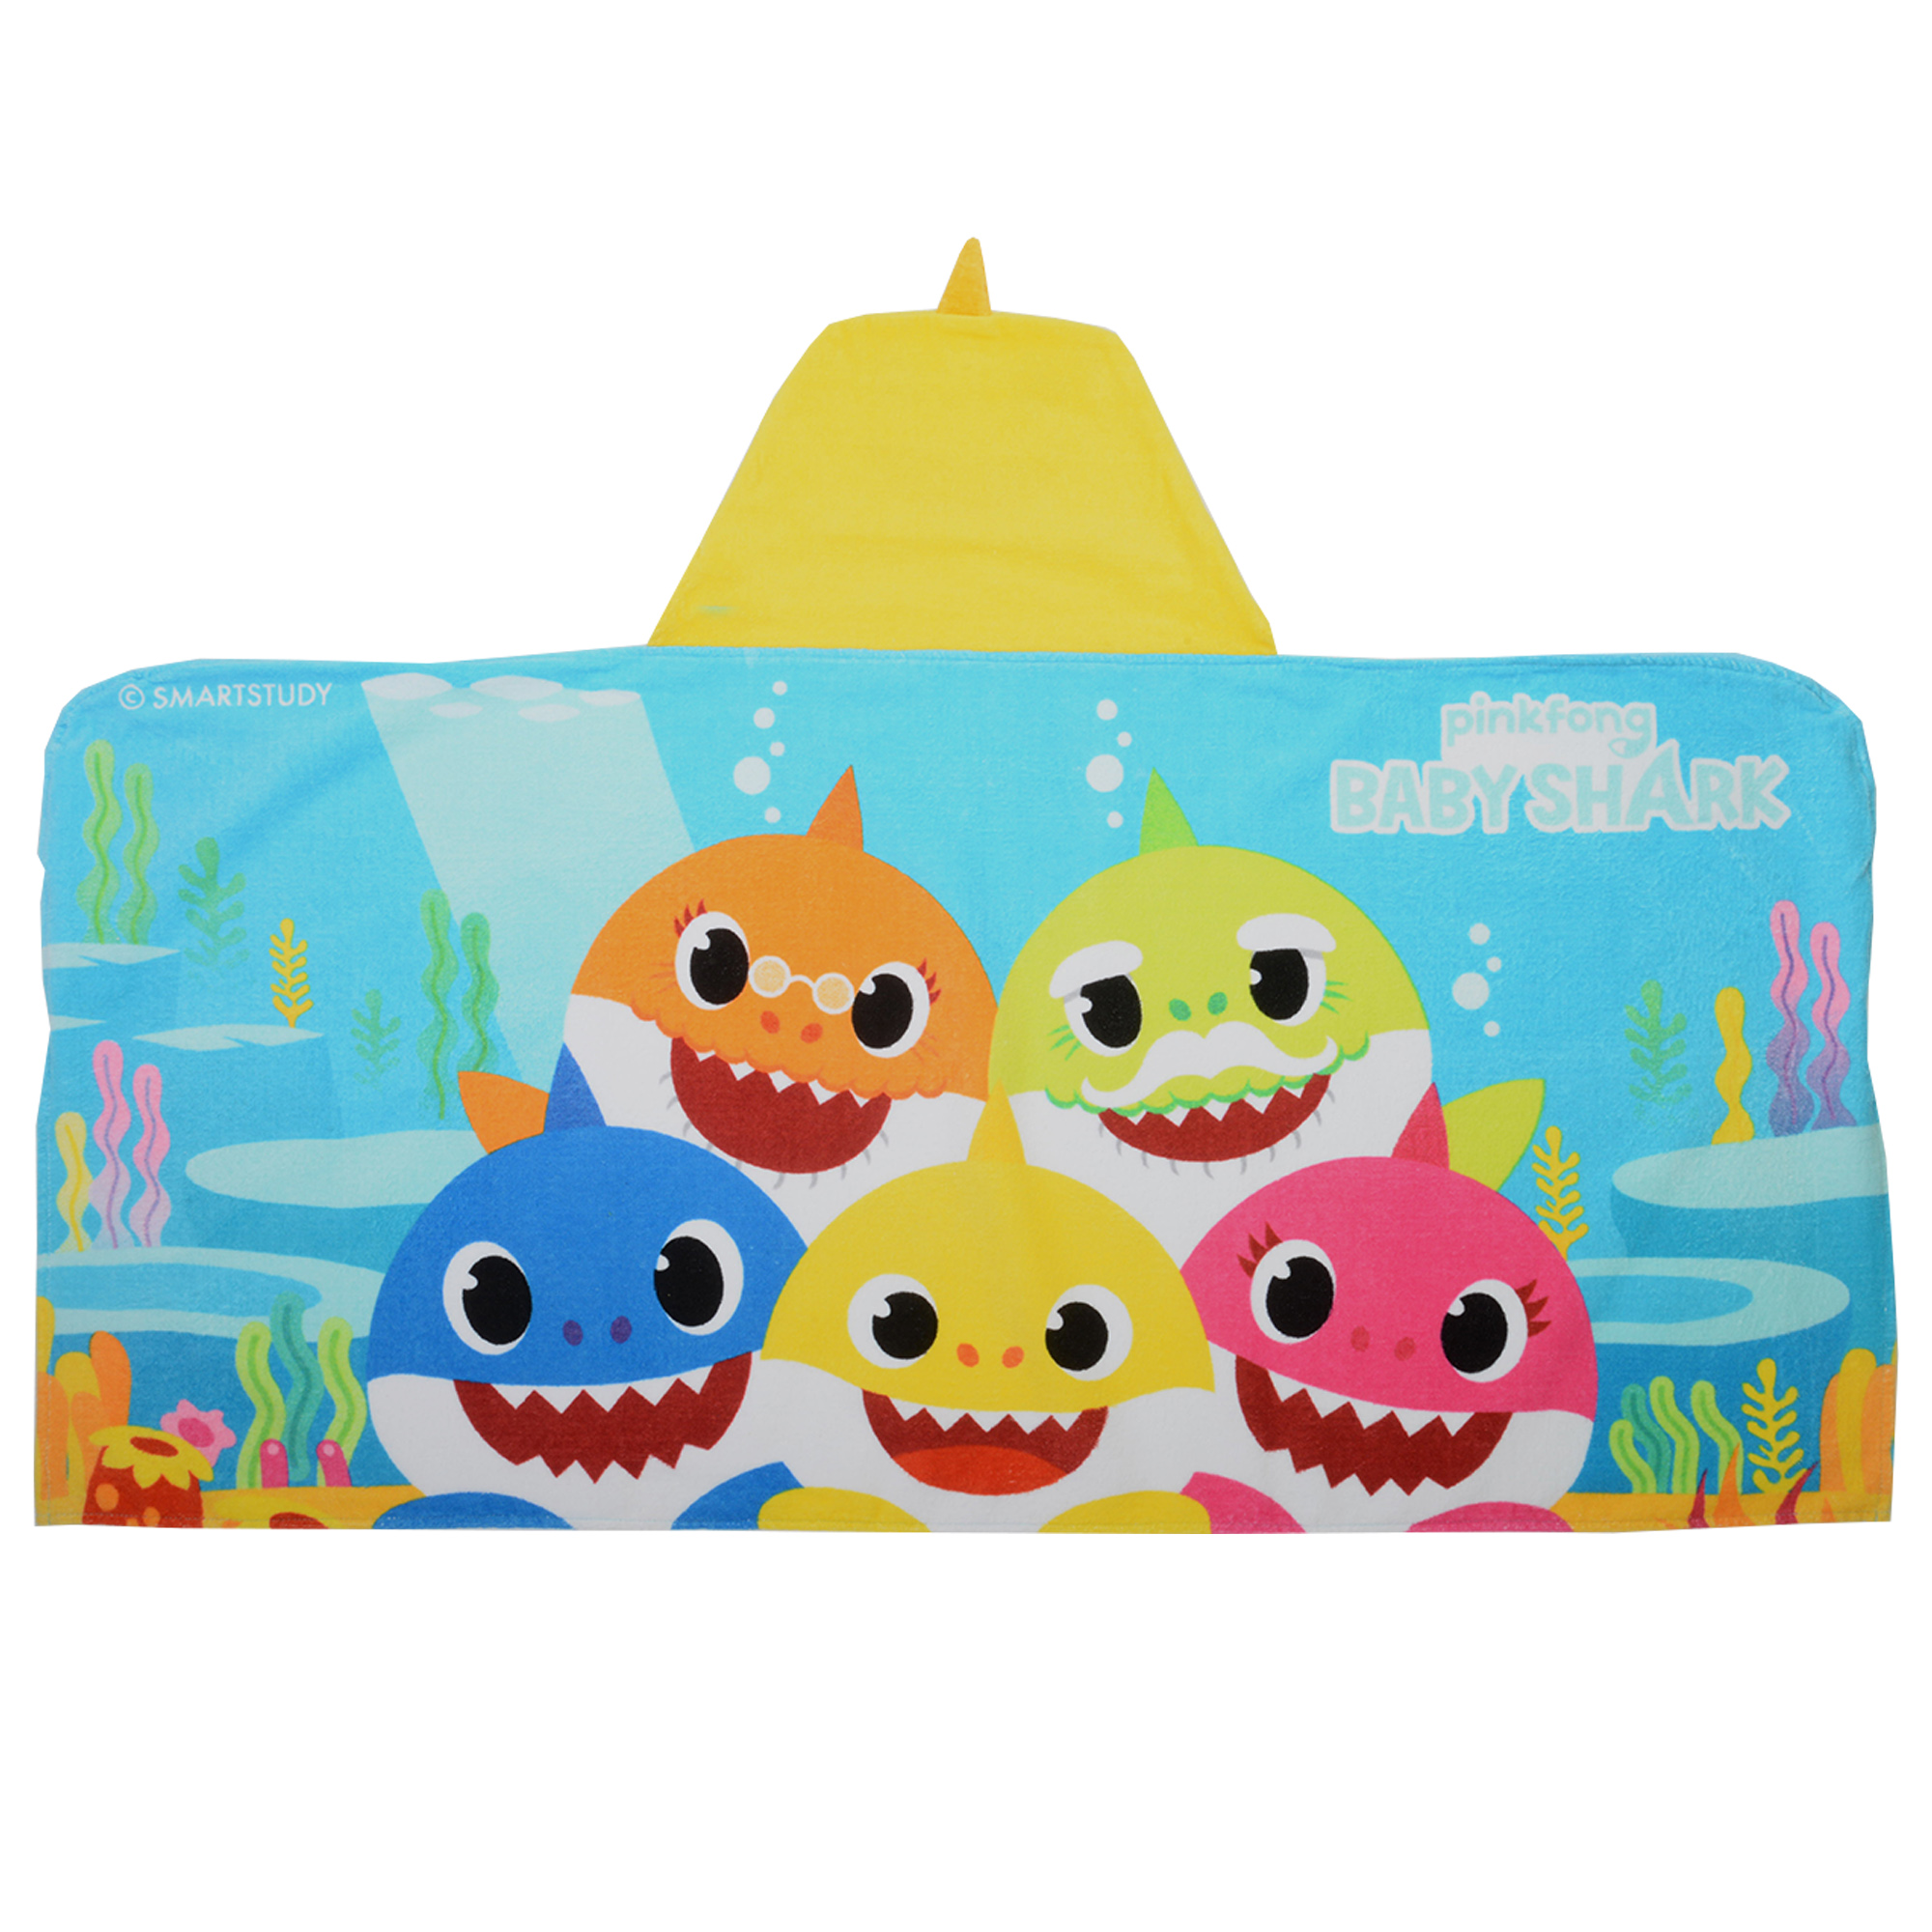 Baby Shark Kids Cotton Hooded Towel - image 3 of 6